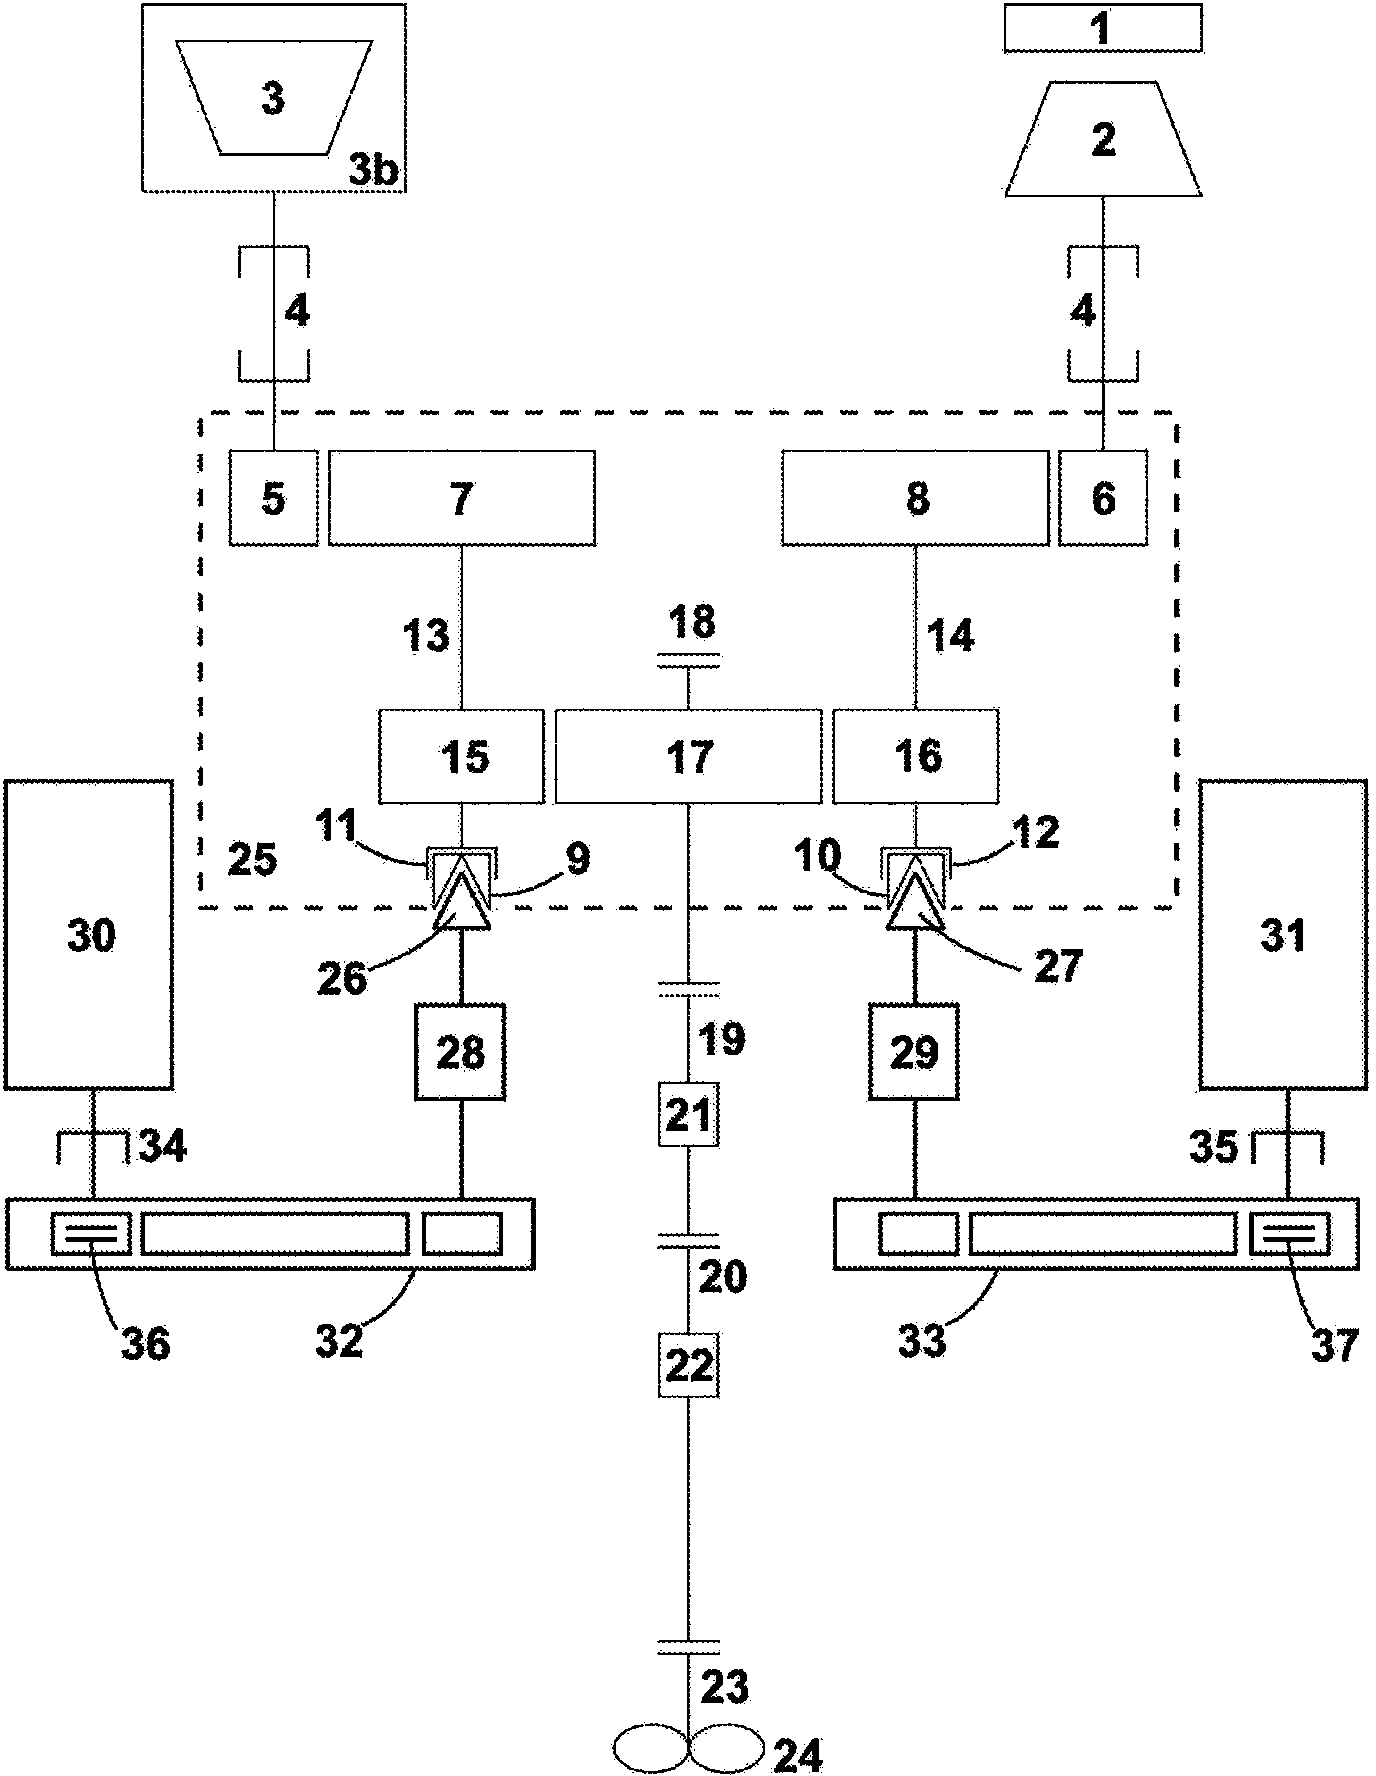 Method of converting steam turbine - powered lng carriers